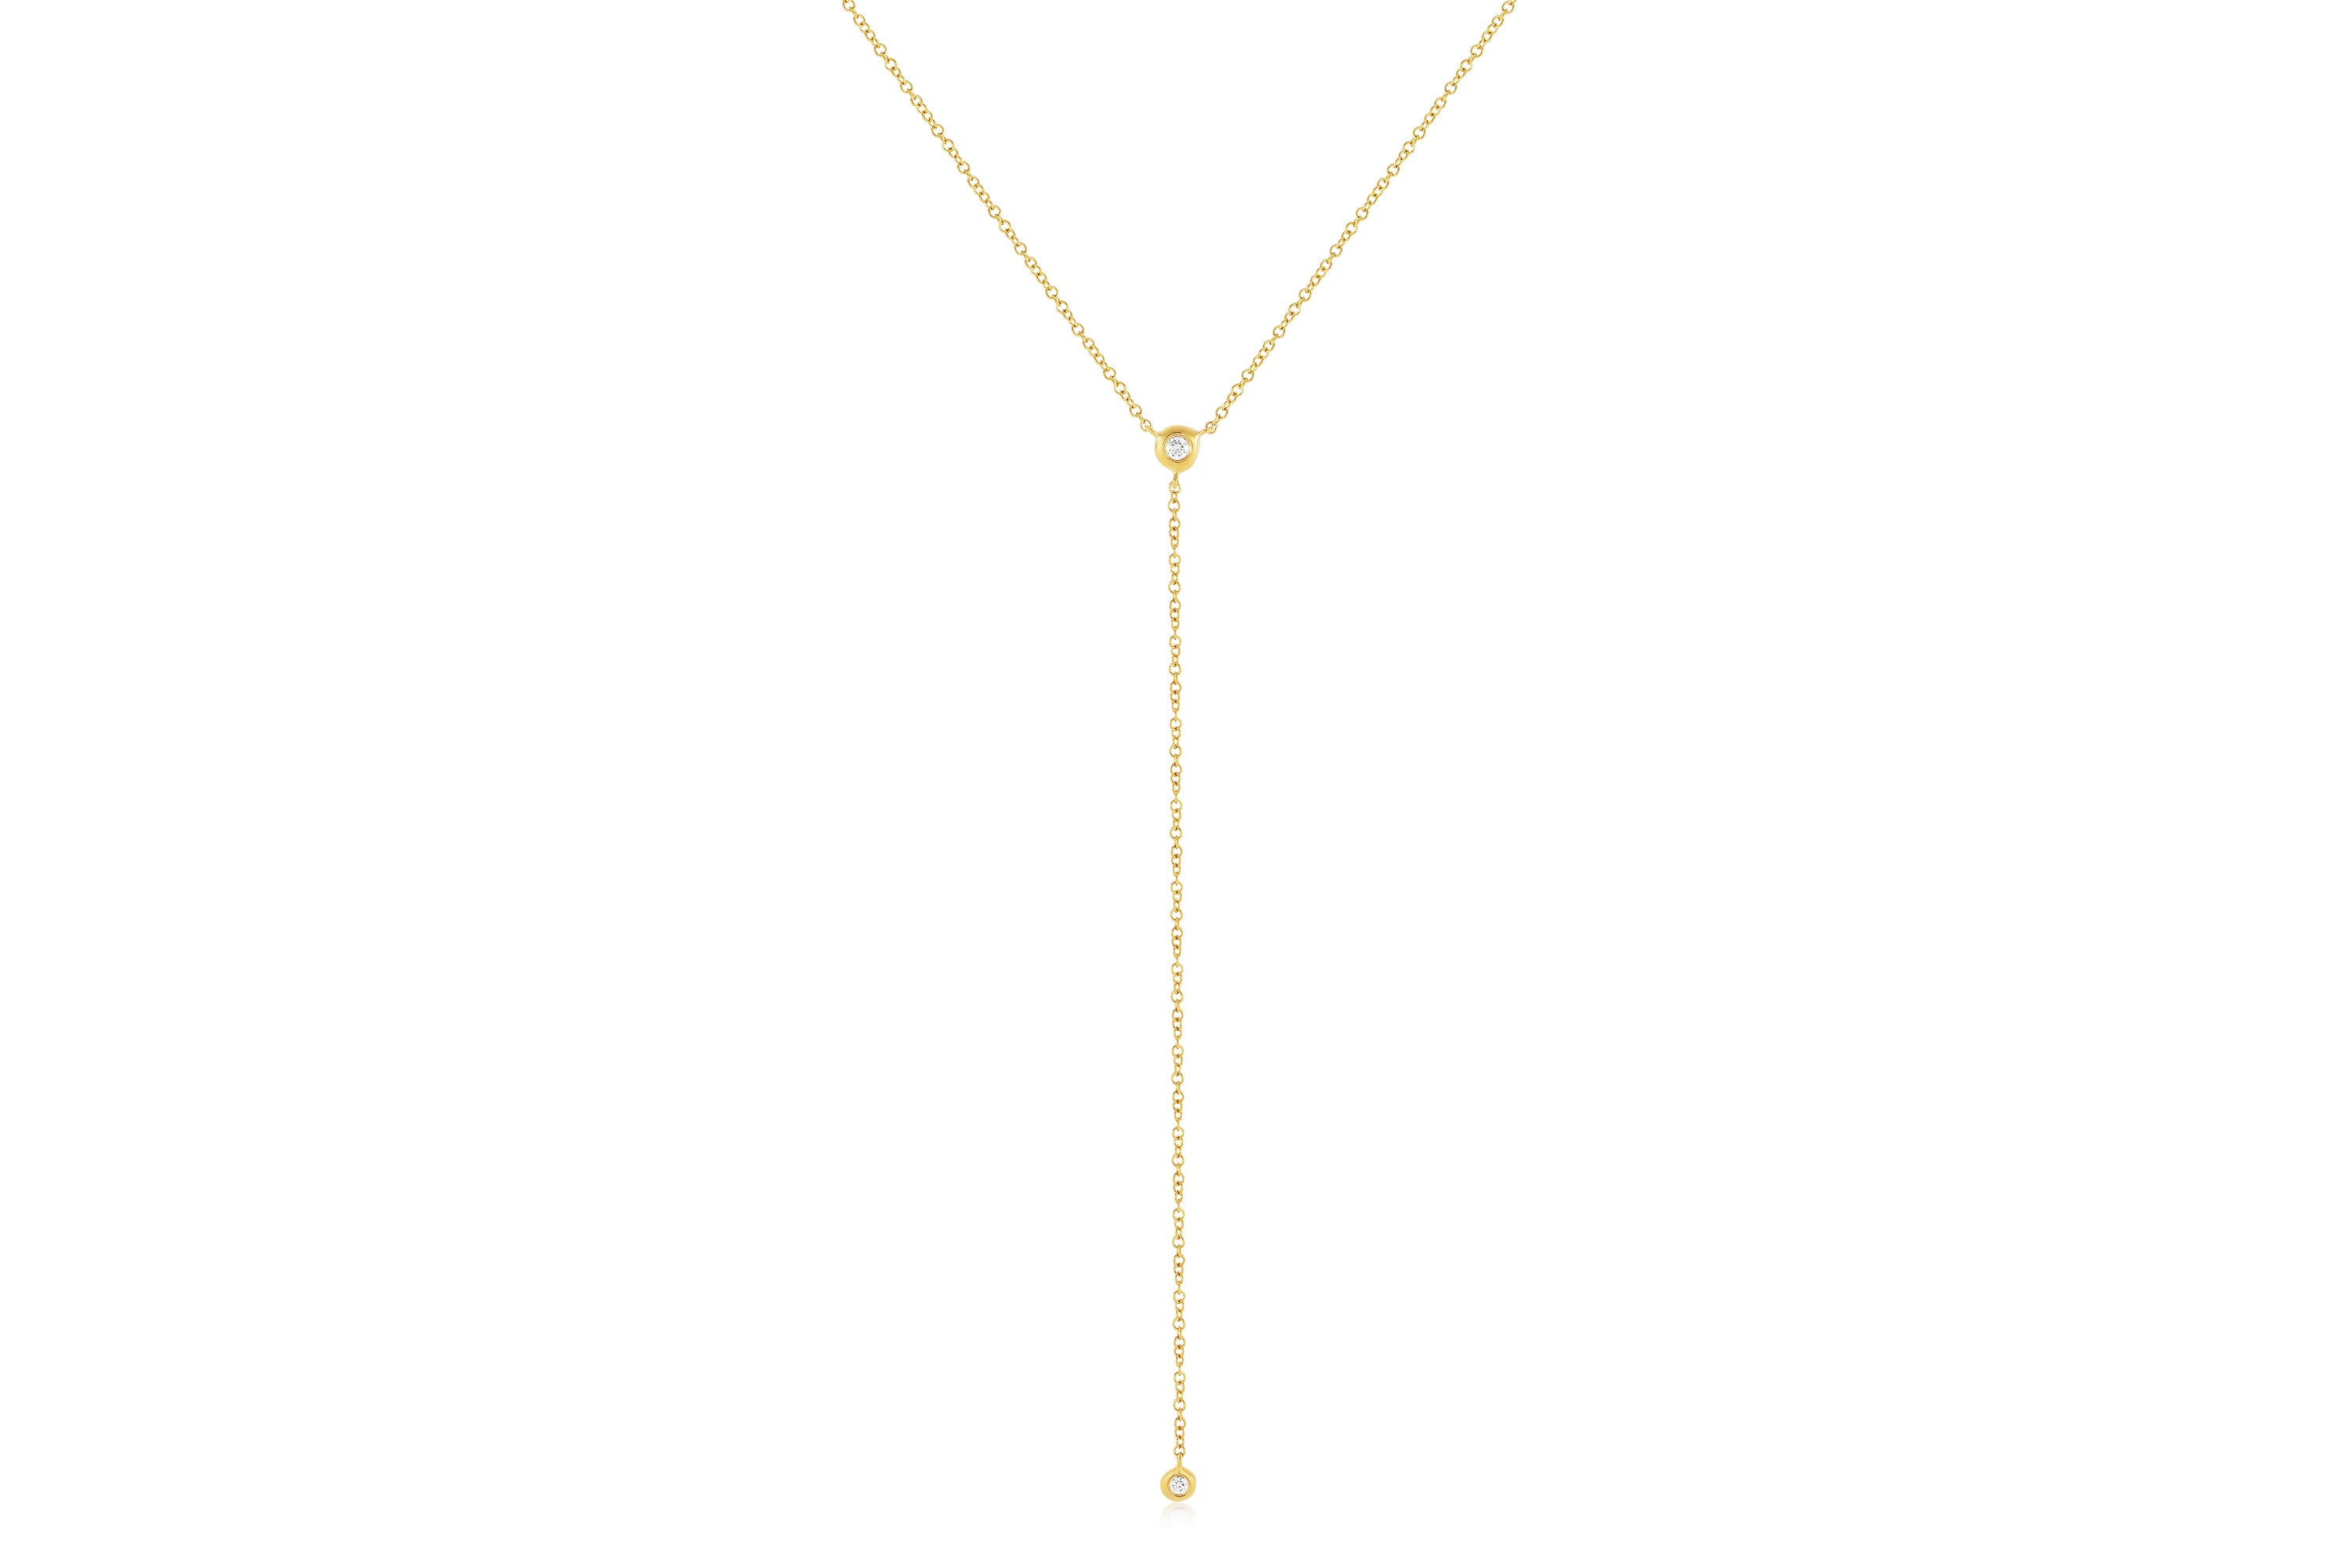 Diamond Pillow Lariat Necklace in 14k yellow gold